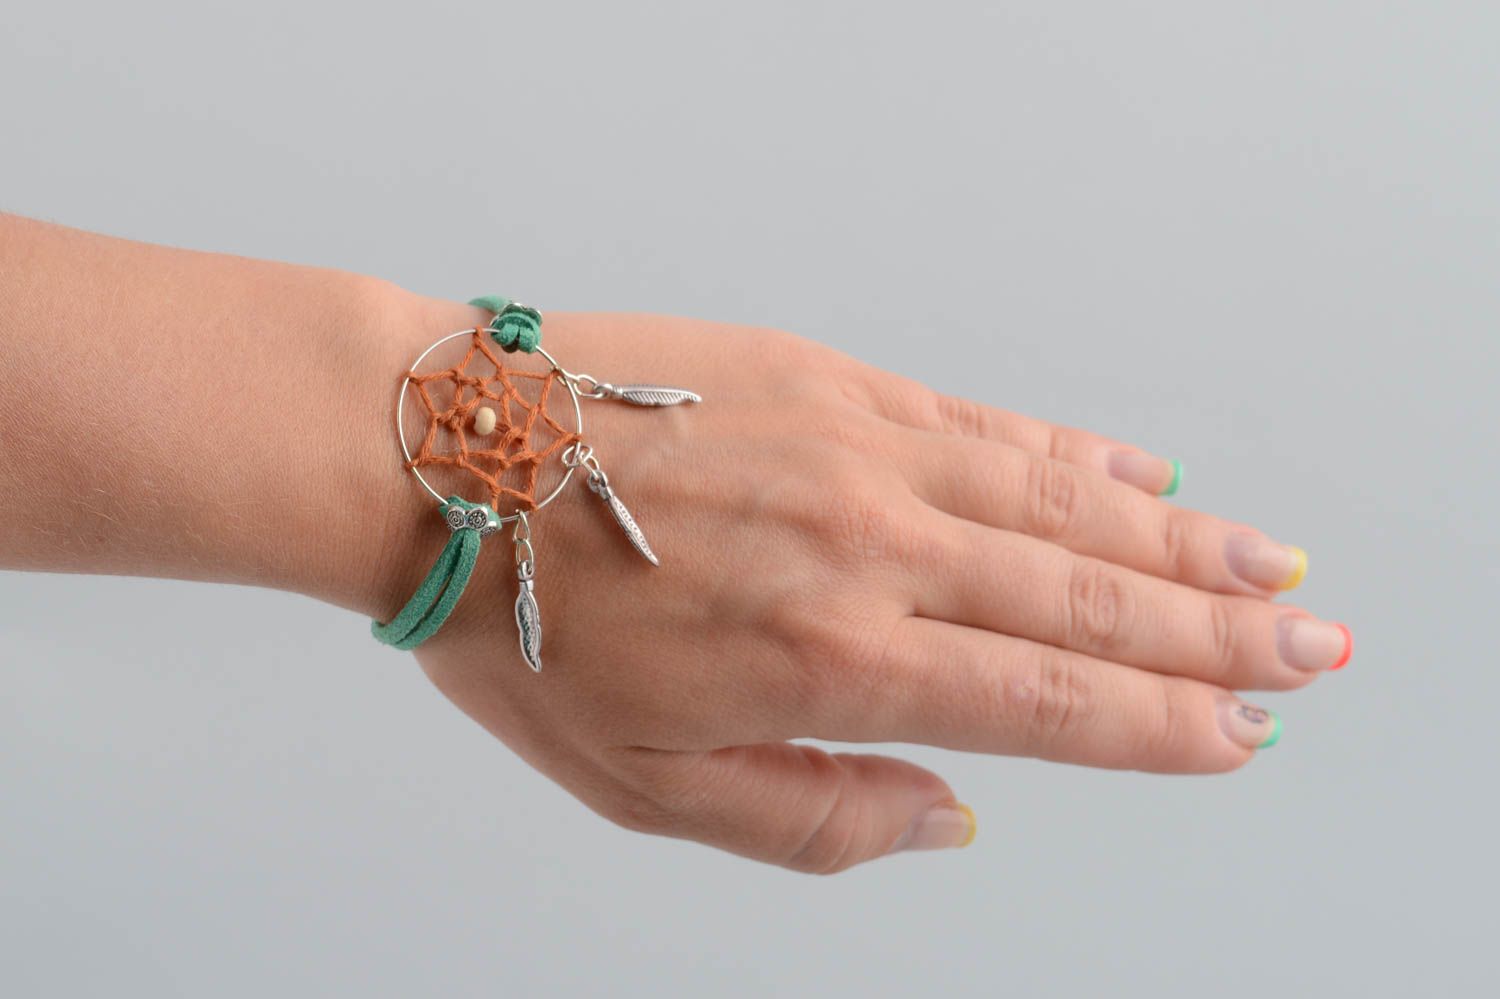 Handmade green faux cord wrist bracelet with metal charms dreamcatcher amulet photo 5